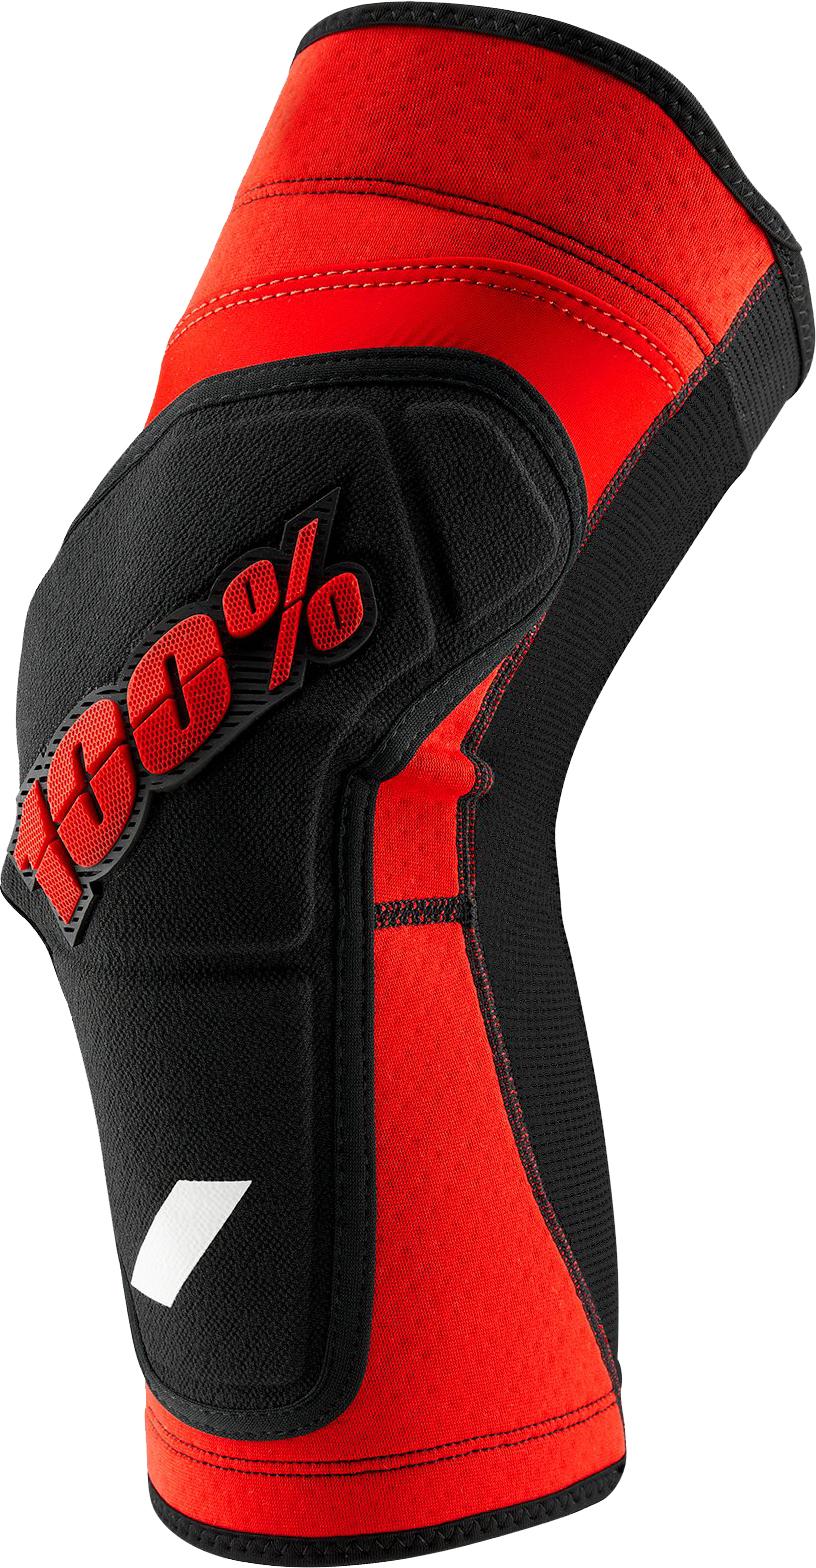 100% Geomatic Glove - Lg Red   Gloves